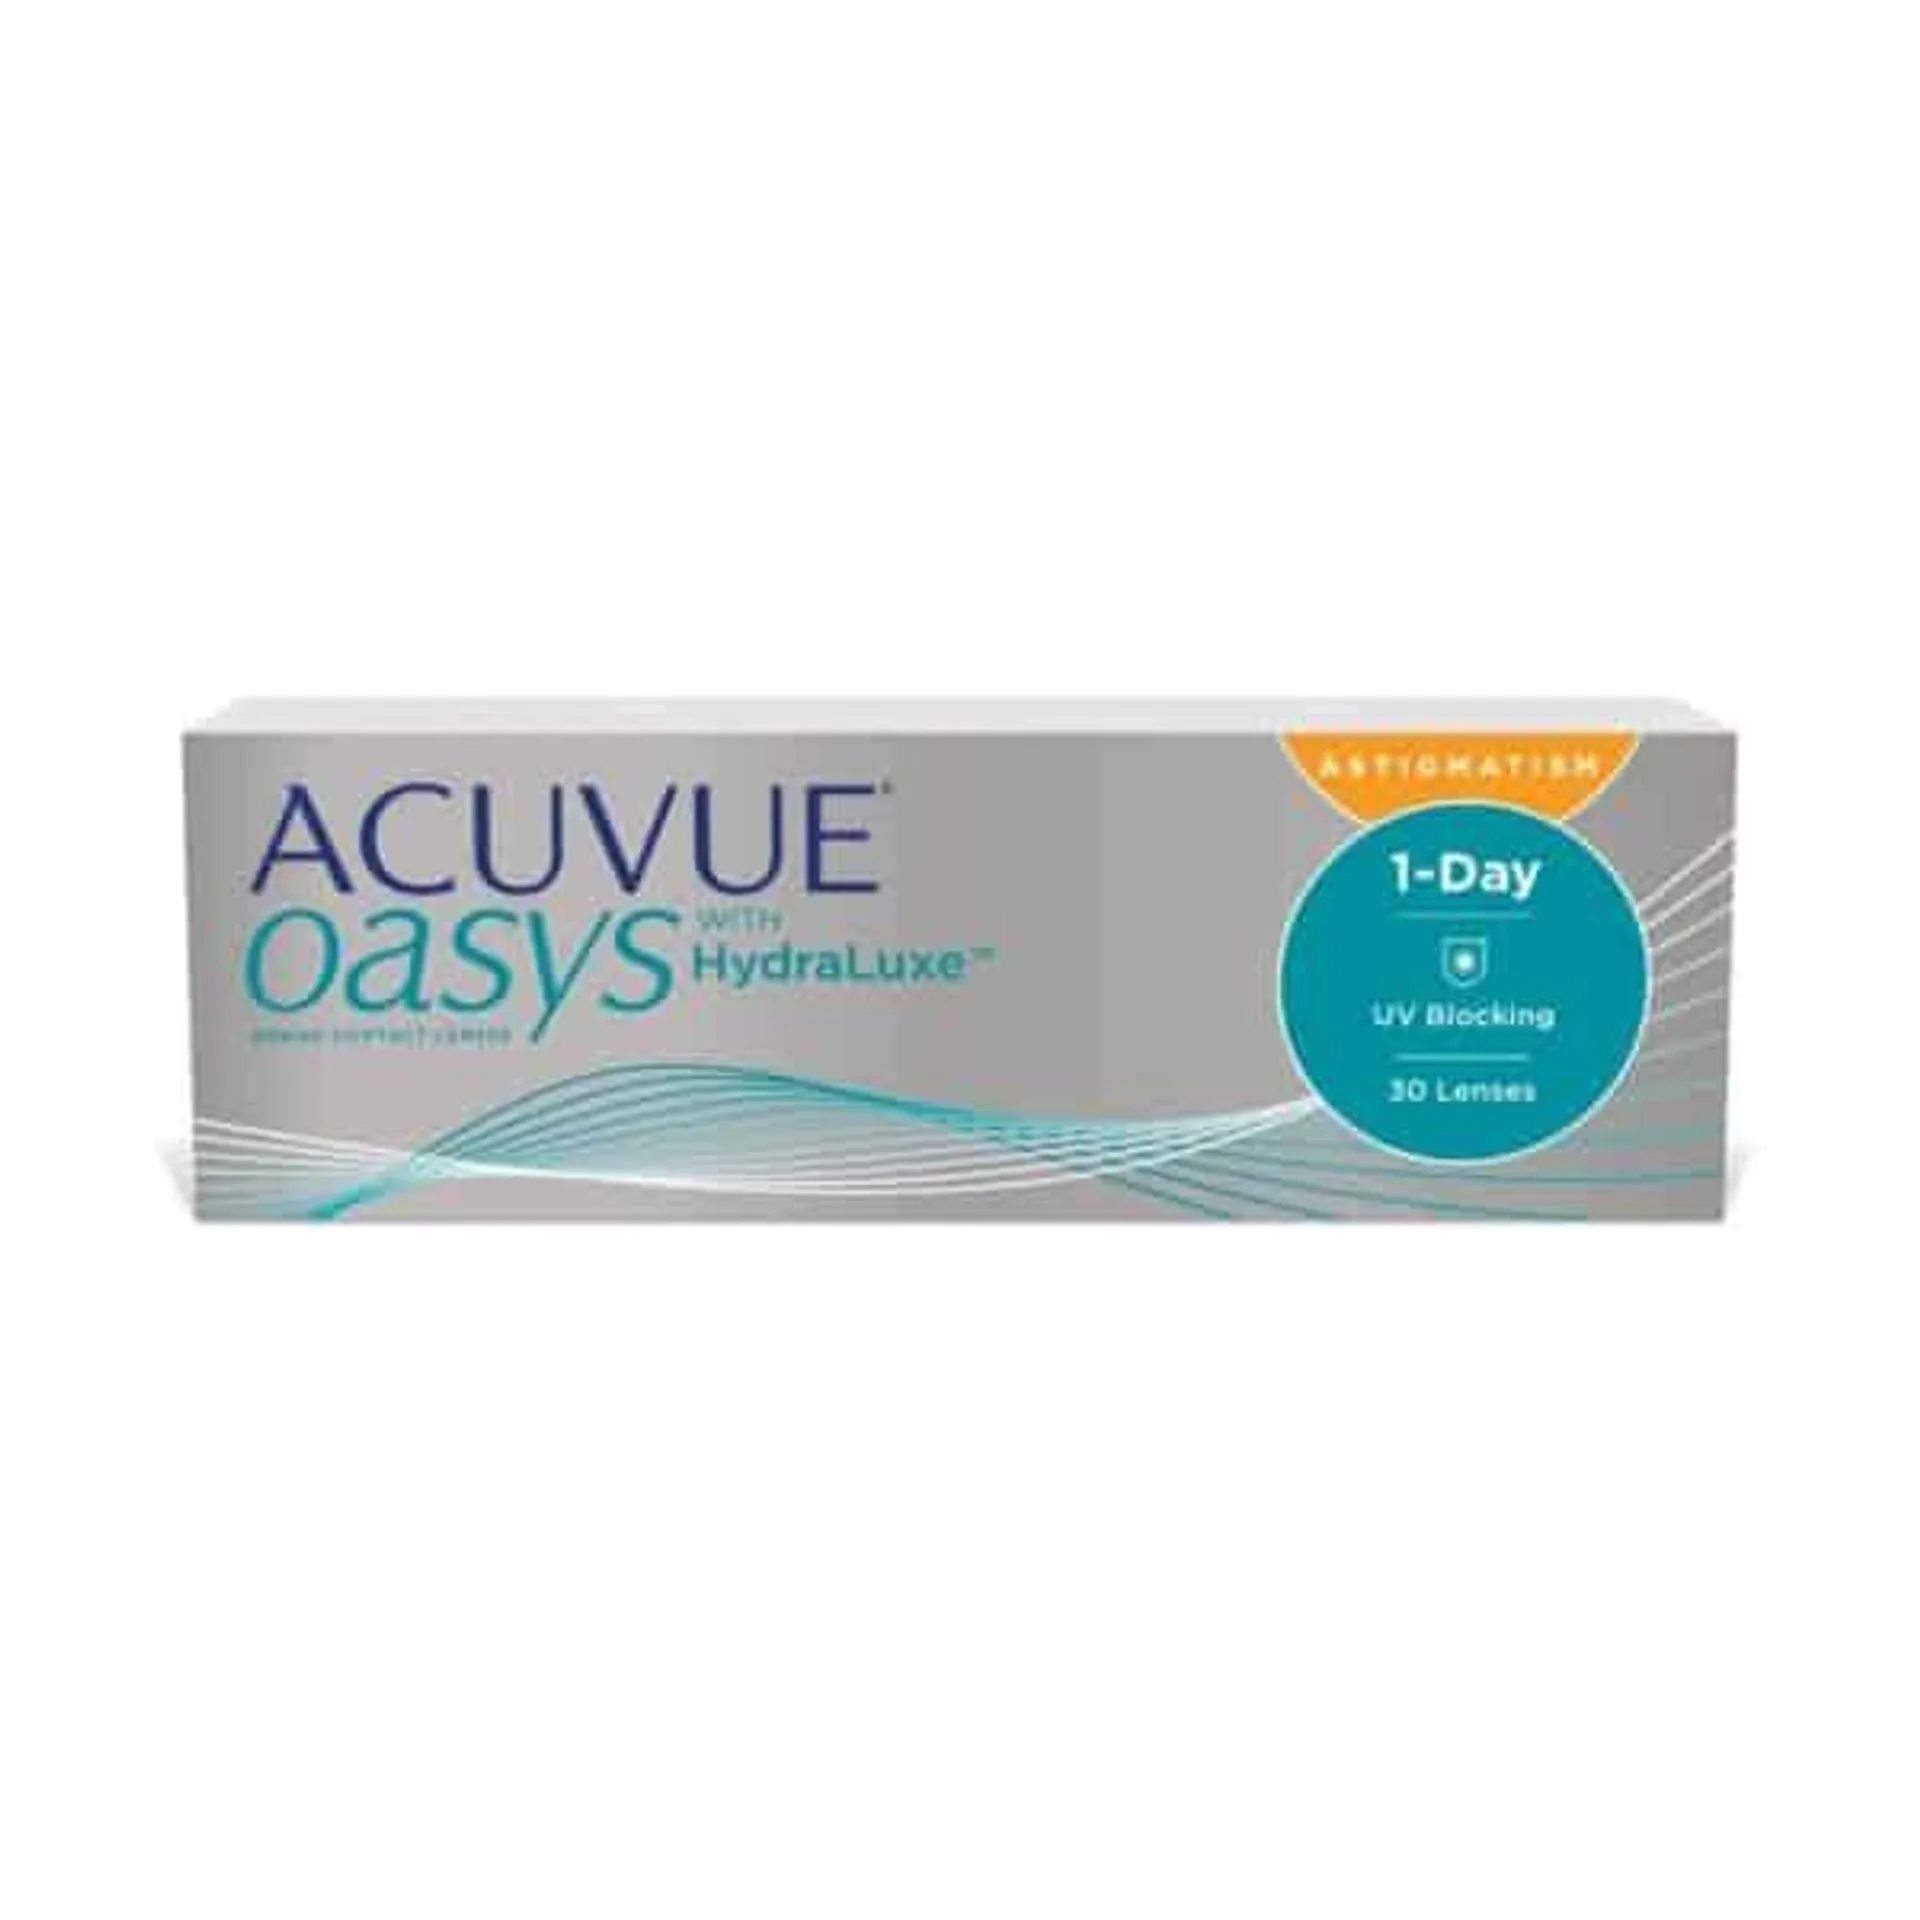 Acuvue Oasys Hydraluxe Astigmatism